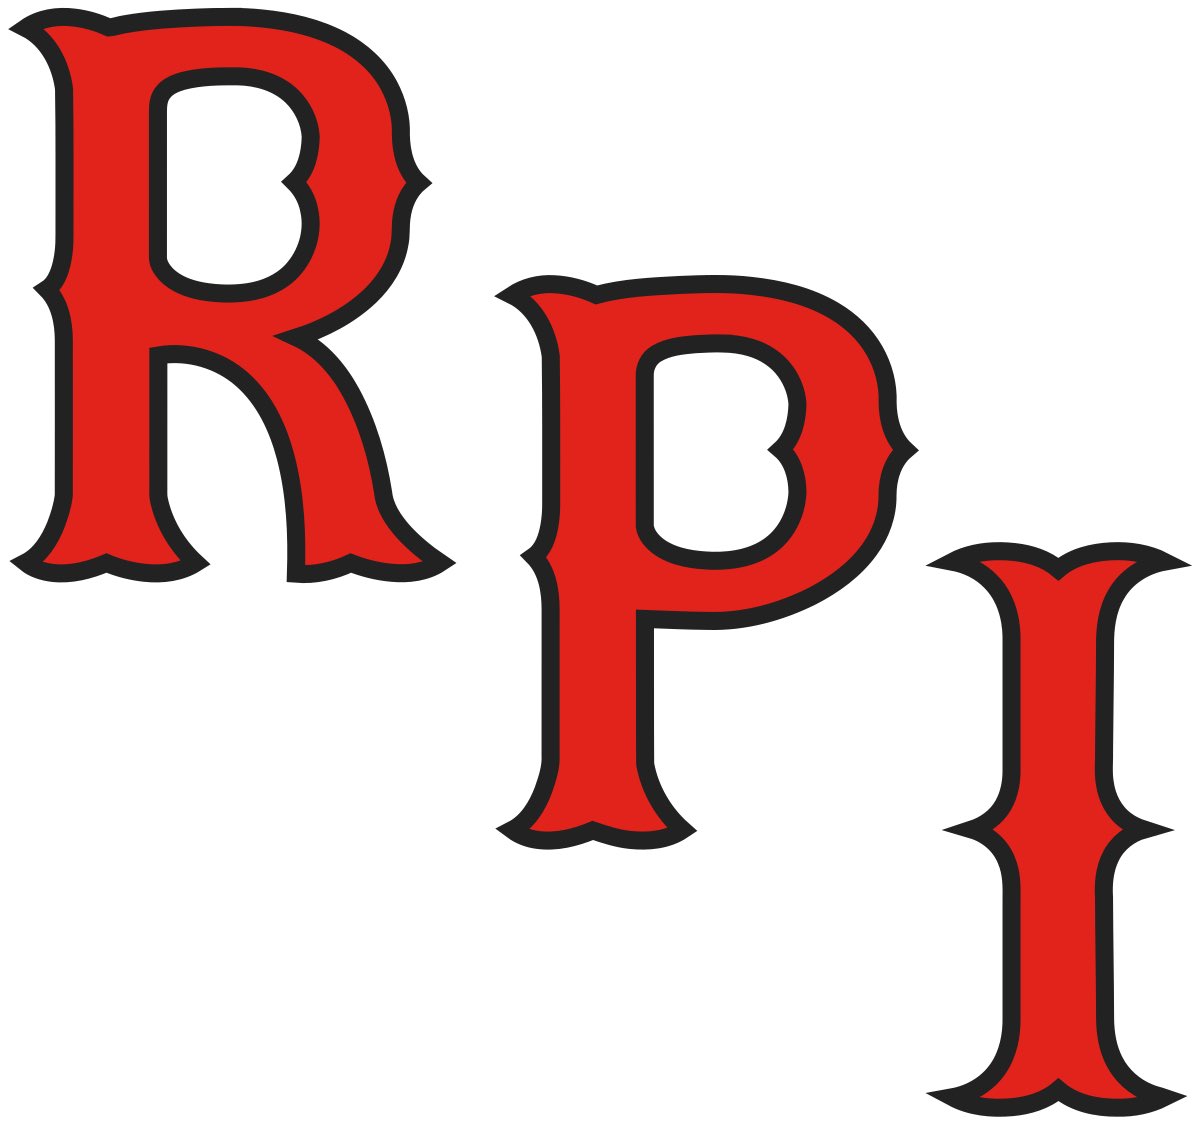 I’m proud to announce I have received an offer from @RPIFootball. Thank you to @Coach_Marcella @CoachRI @CoachKosanovich